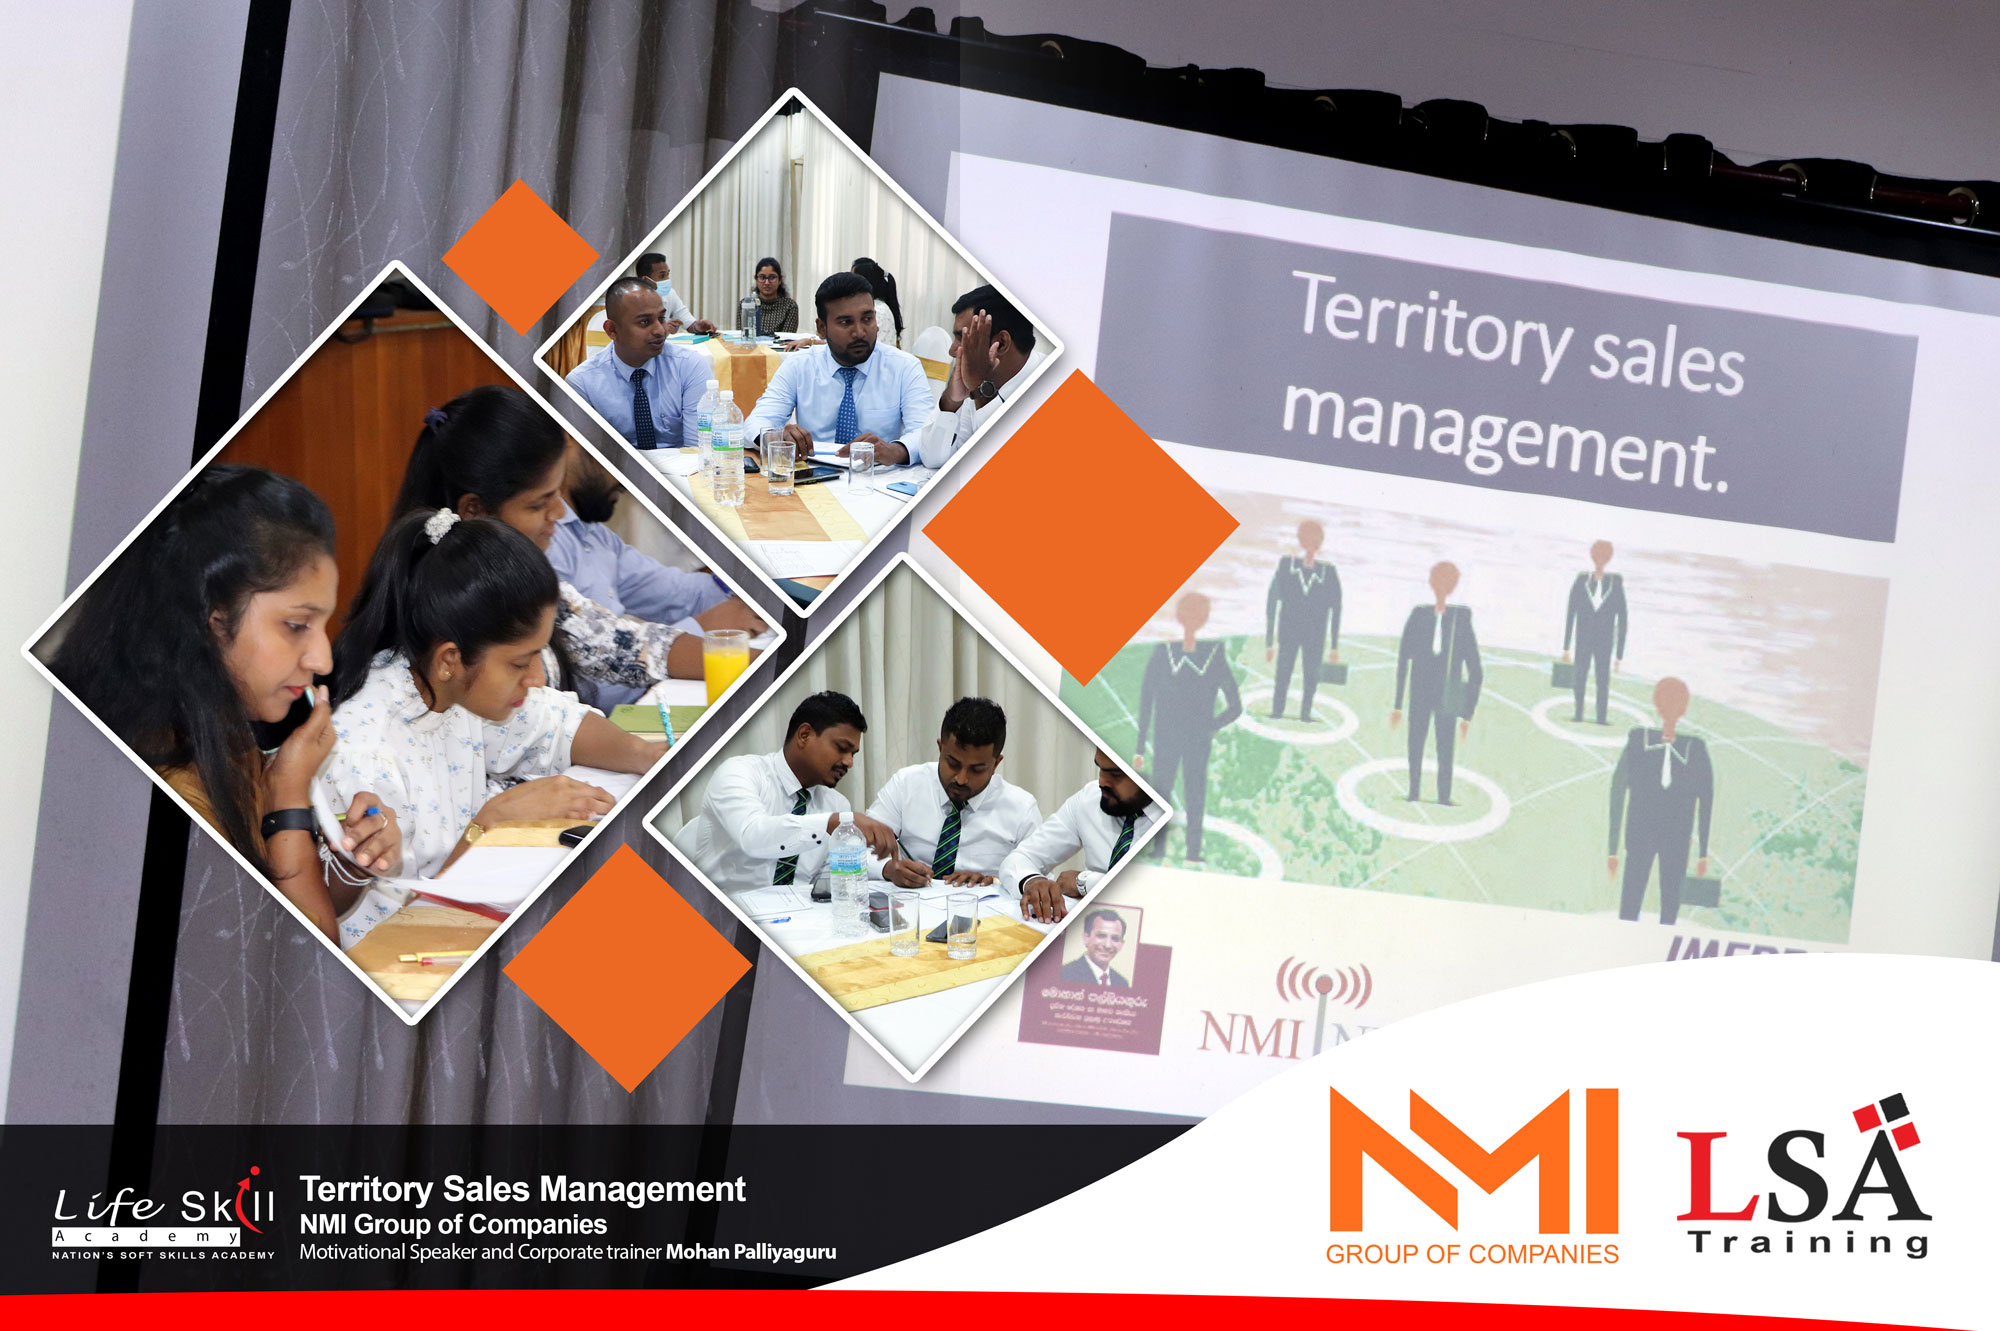 Territory Sales Management for NMI Infra